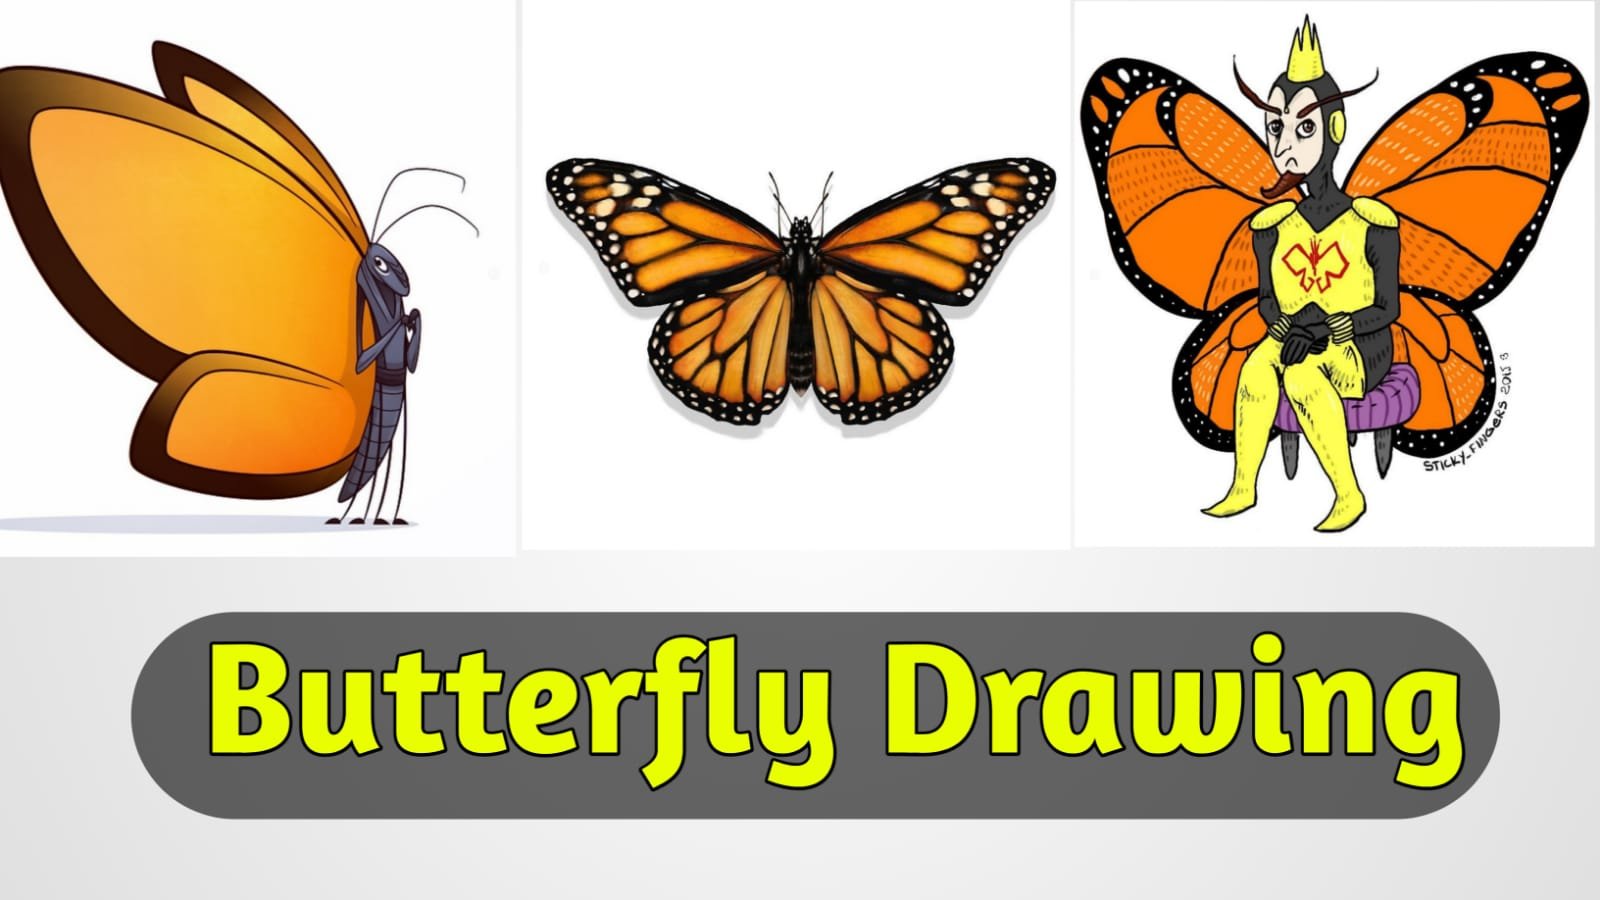 What are some ways to tell if someone is drawing you a butterfly? - Quora